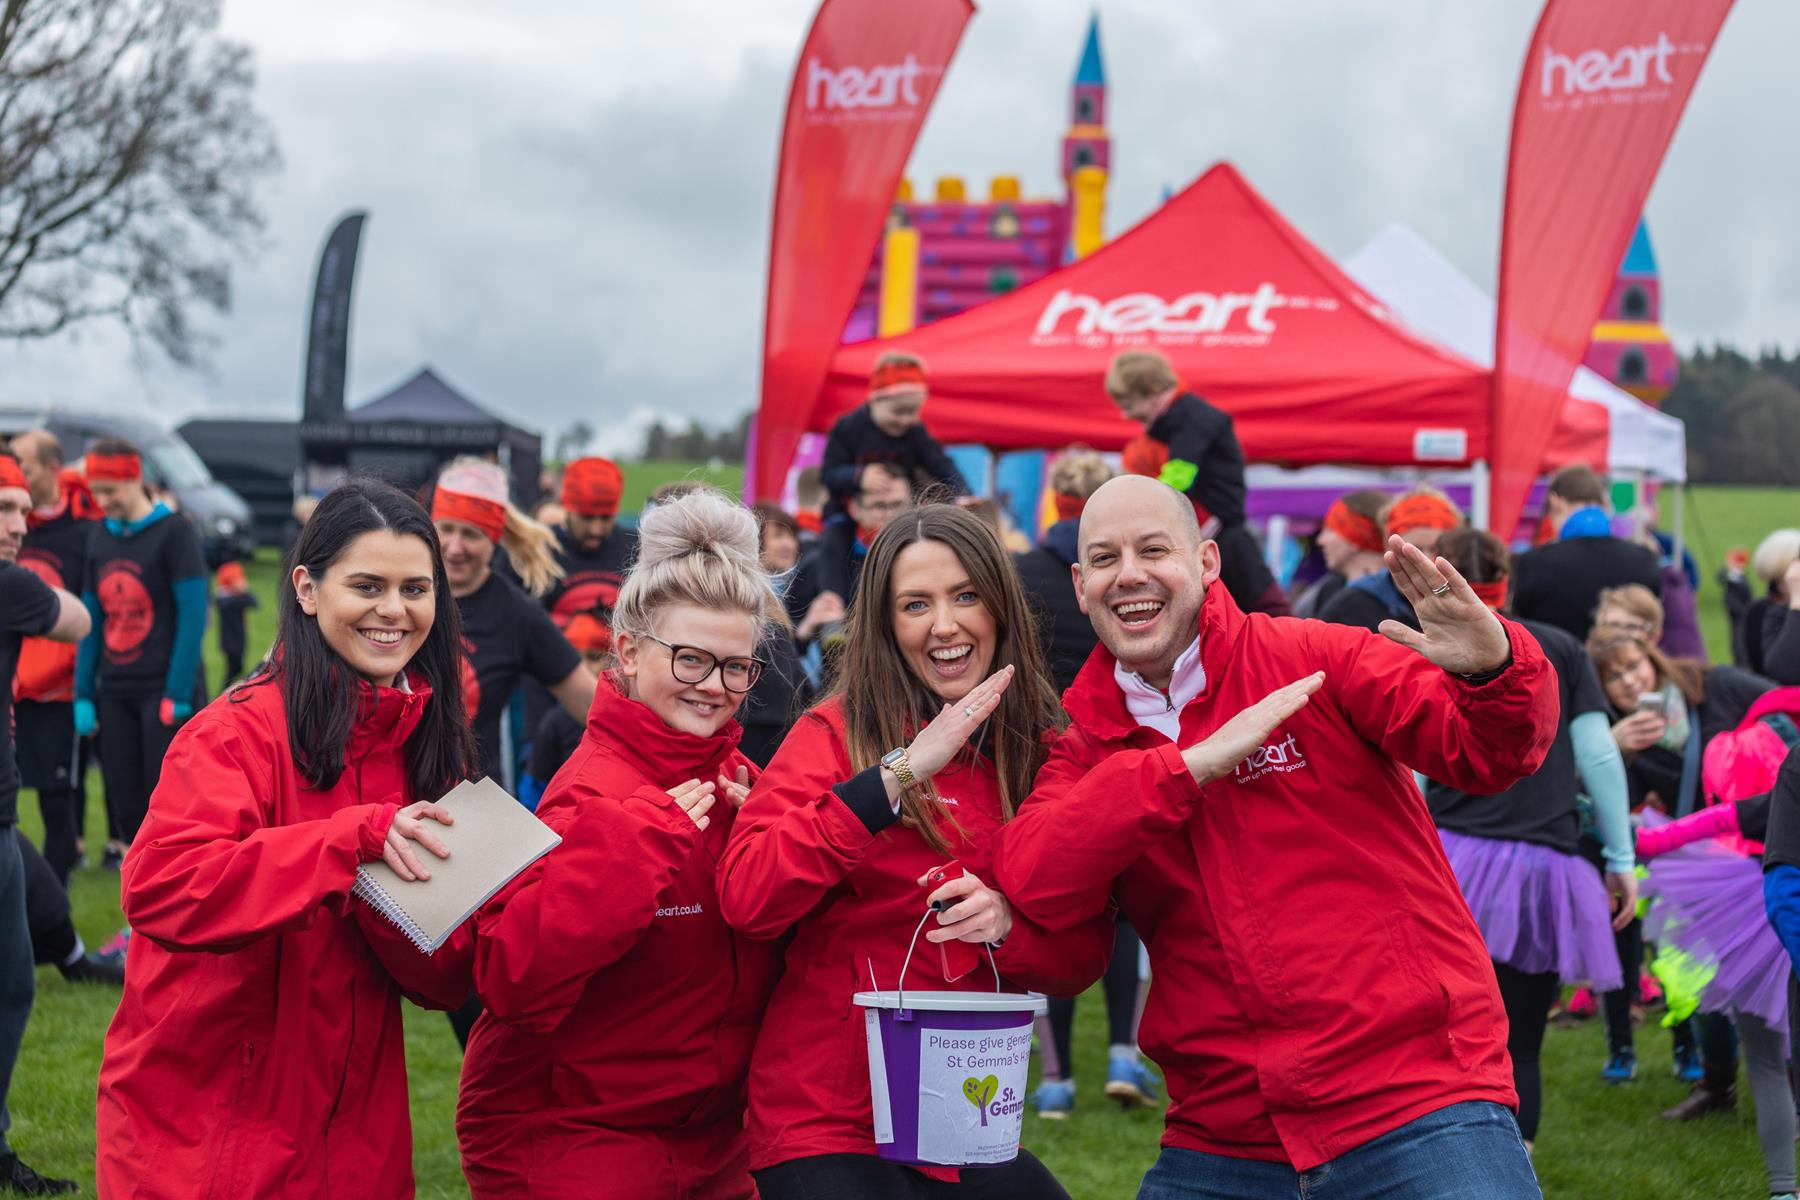 Four people wearing red Heart Radio jackets, with Heart Radio gazebo in the background